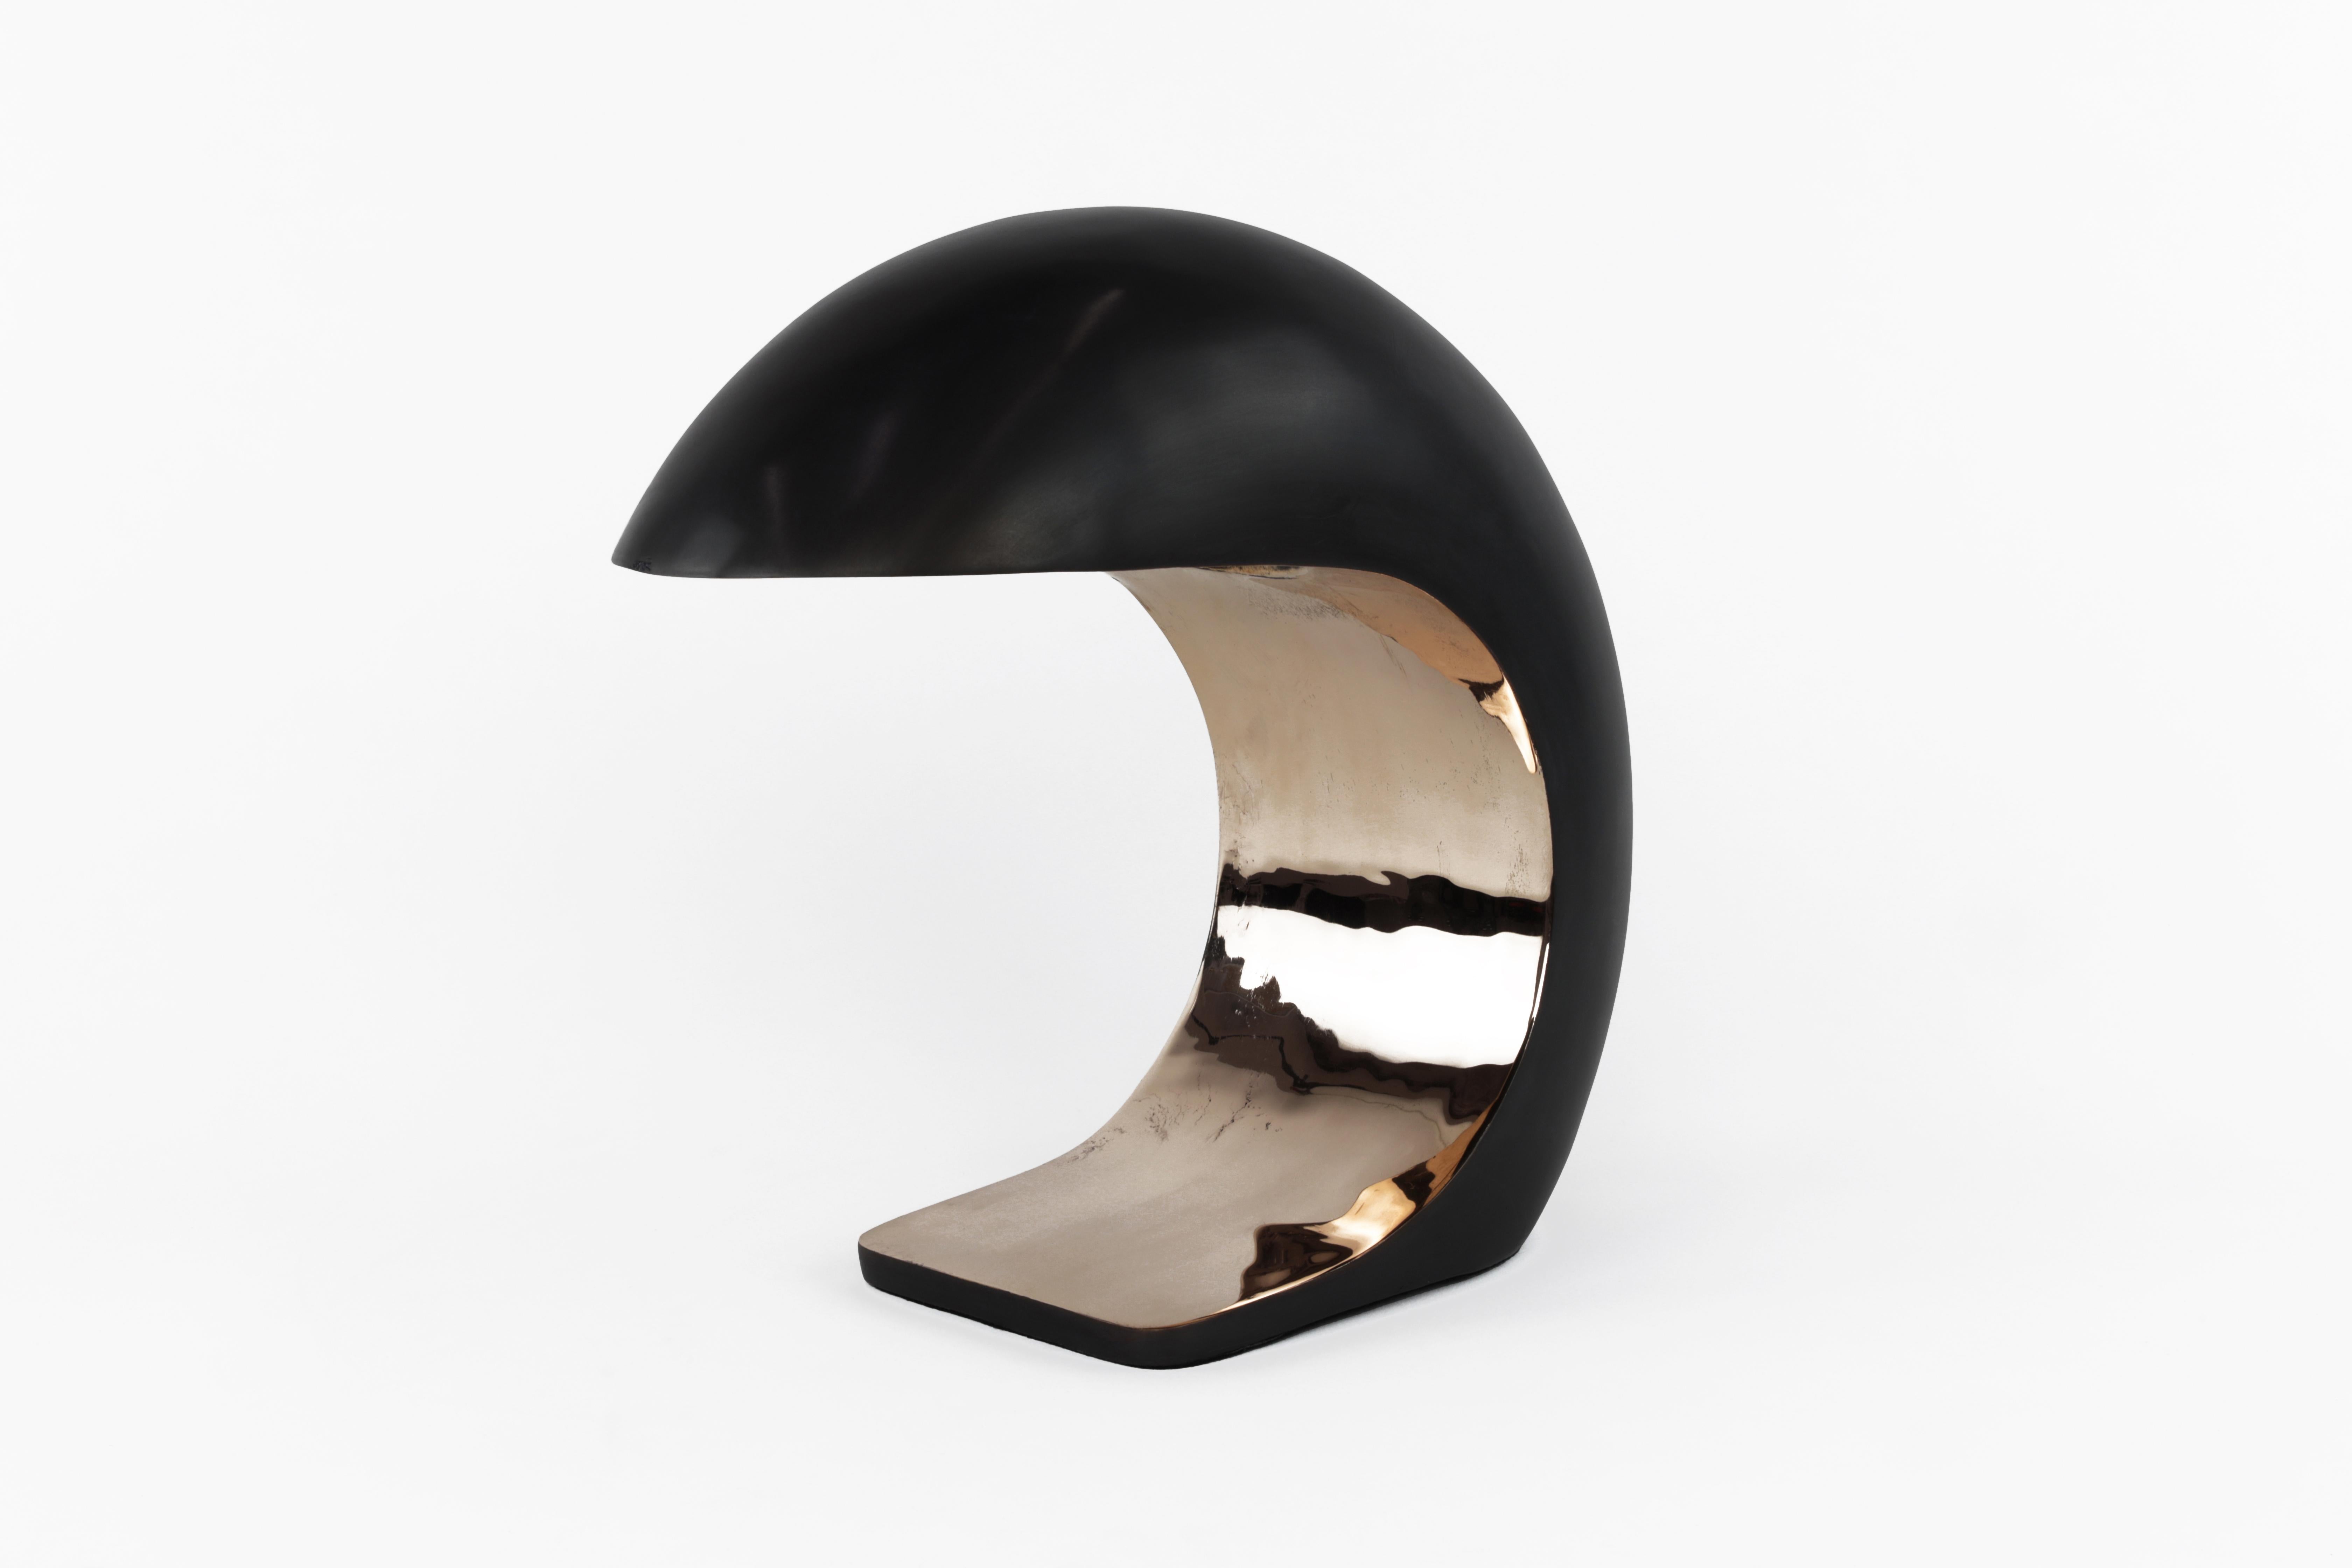 The (medium) NAUTILUS lamp is inspired by midcentury Italian design.
It is cast bronze and weighs up to 20 pounds. The outer shell has a blackened patina and the face is high polished to a mirrored finish.
 
The NAUTILUS illuminates by a